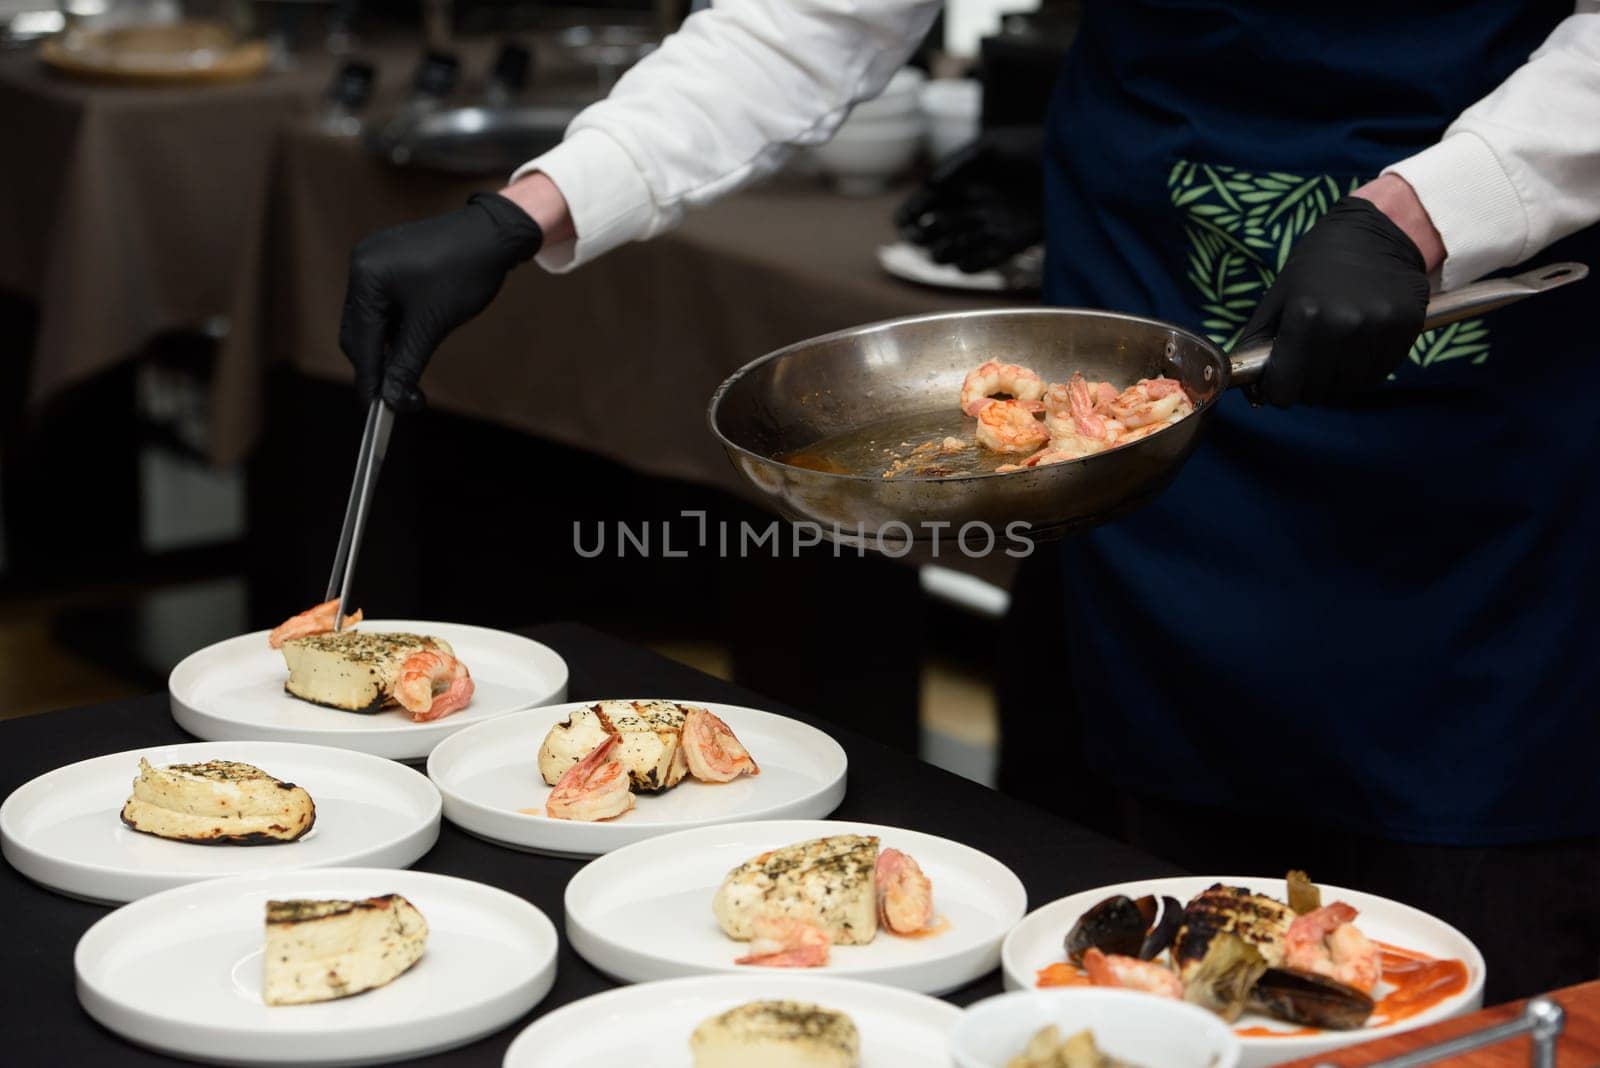 chef in the restaurant prepares saganaki, traditional Greek cheese snack that is fried in a pan or grilled by Ashtray25